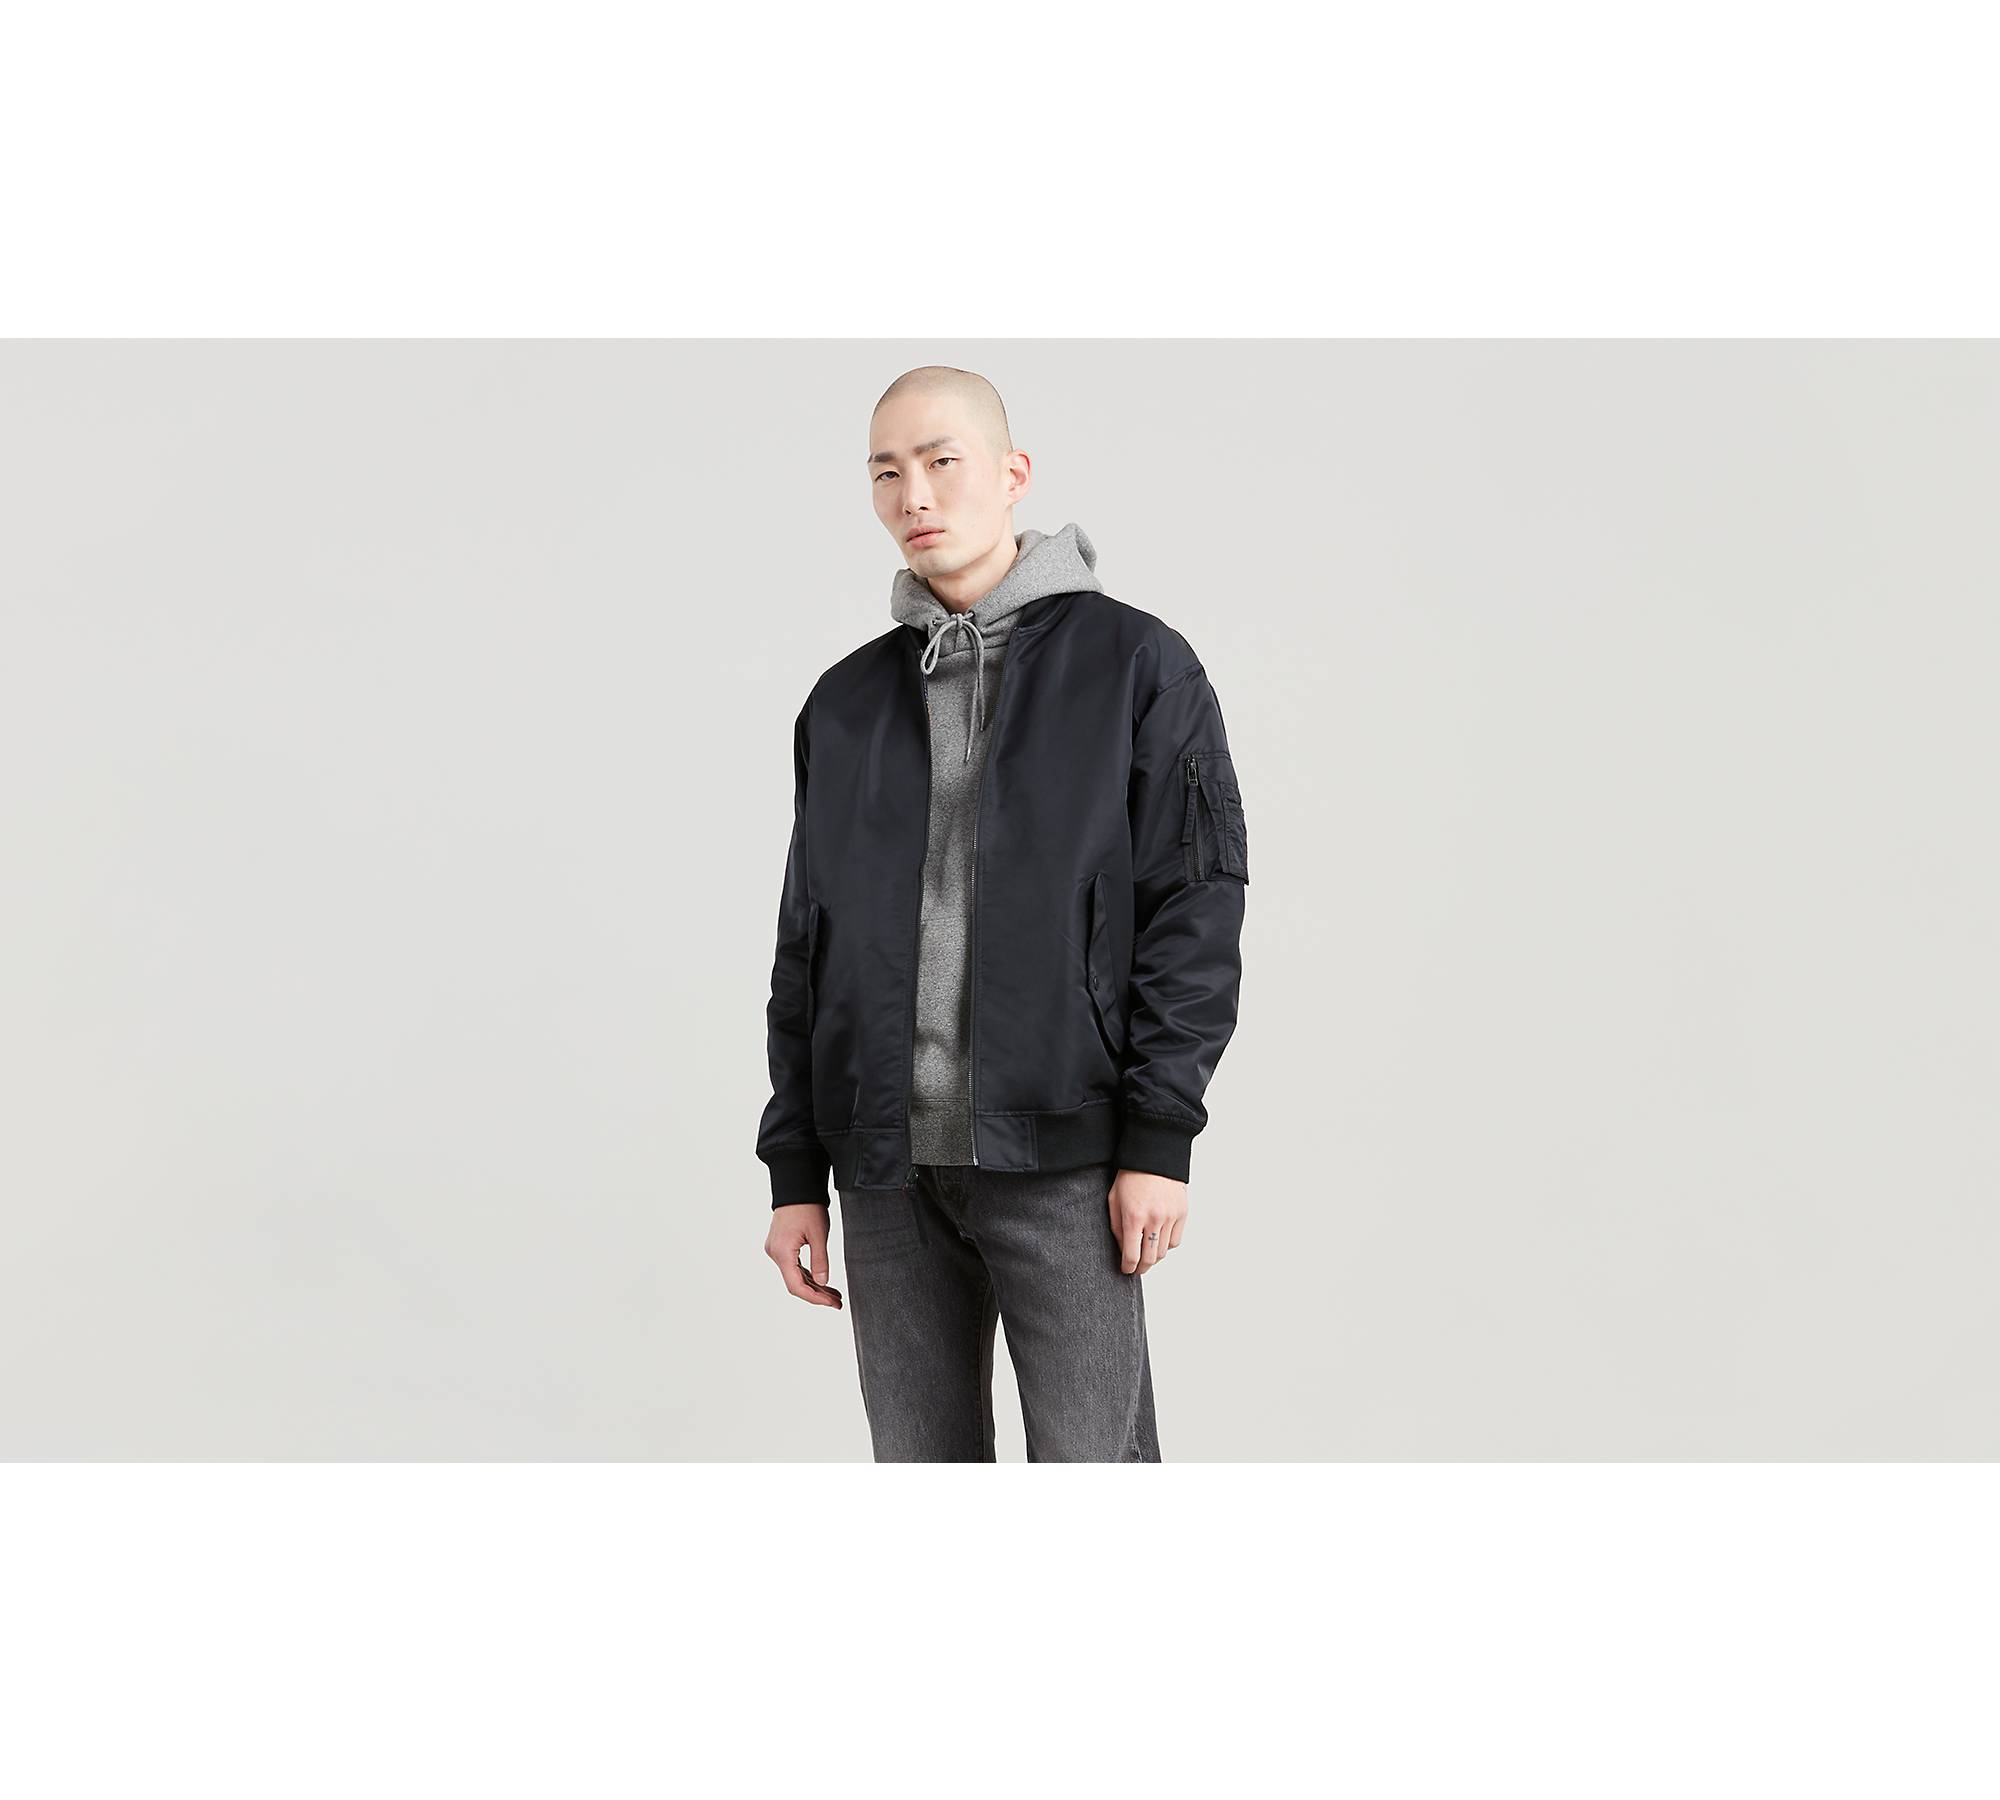 Louis Vuitton Reversible Loose-fit Woven Bomber Jacket in Black for Men